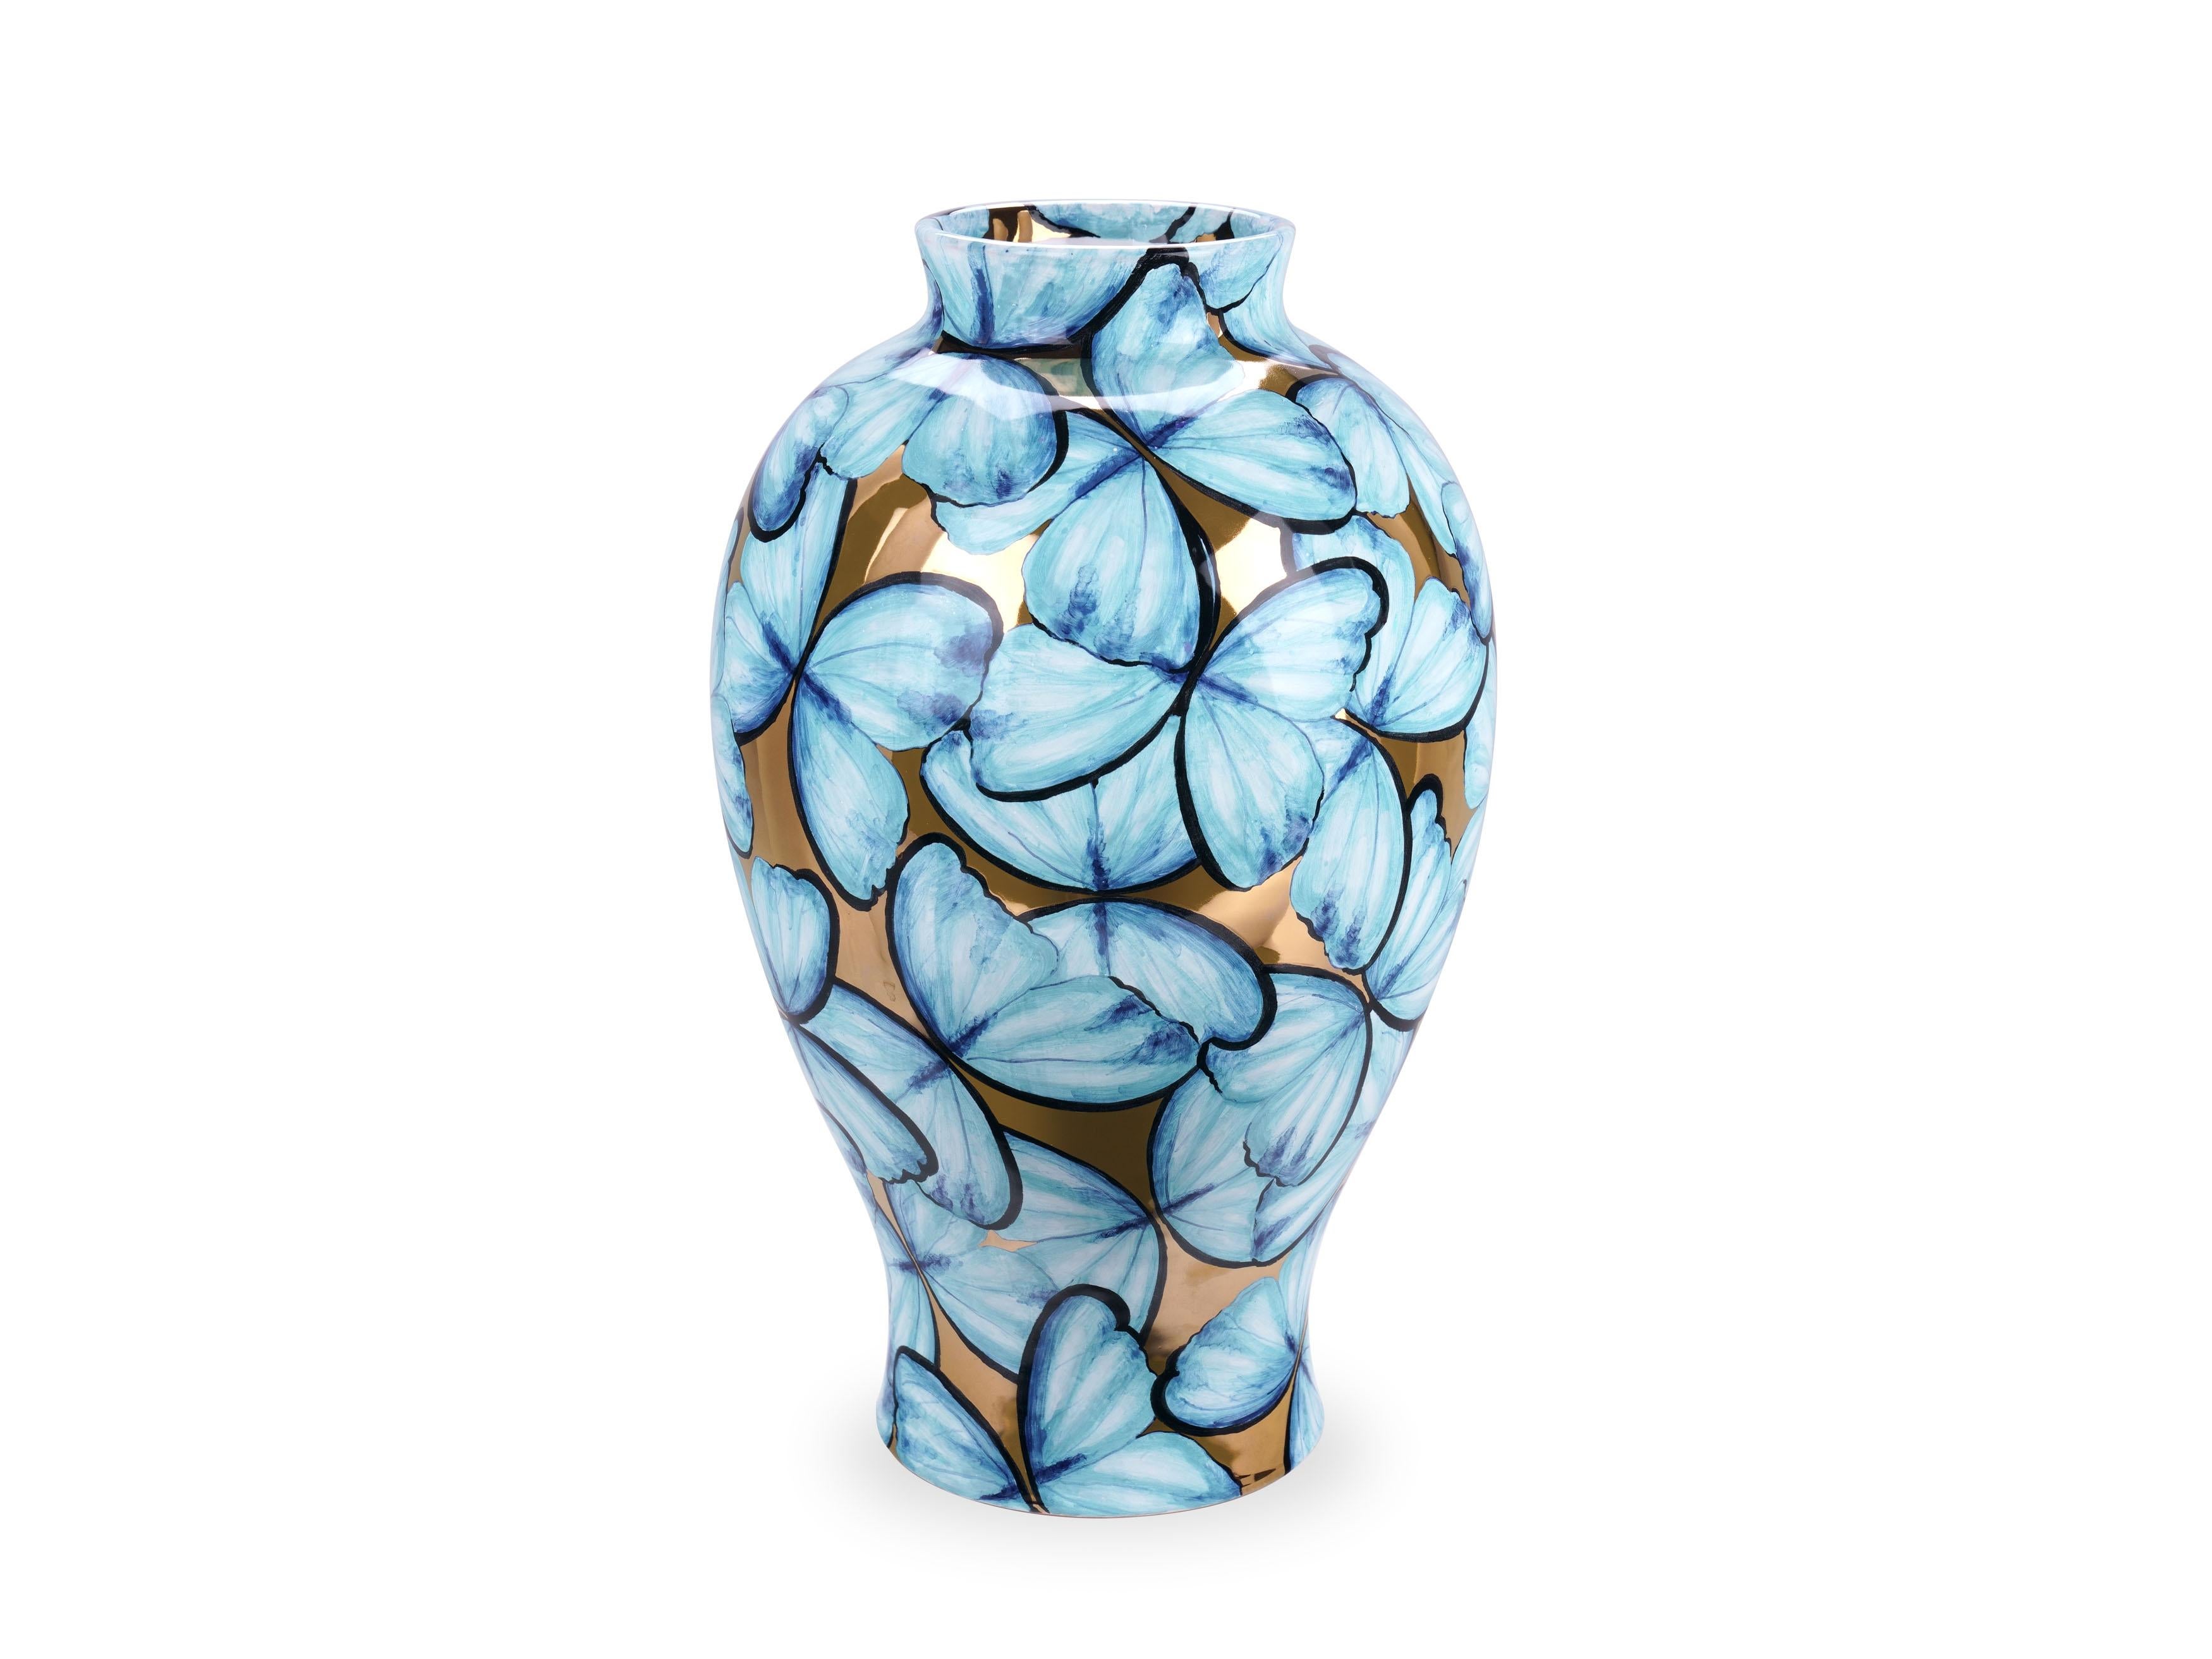 Blue Ceramic Vase Butterflies 24 Kt Gold Luster Hand Painted Decorative Vessel In New Condition For Sale In Recanati, IT